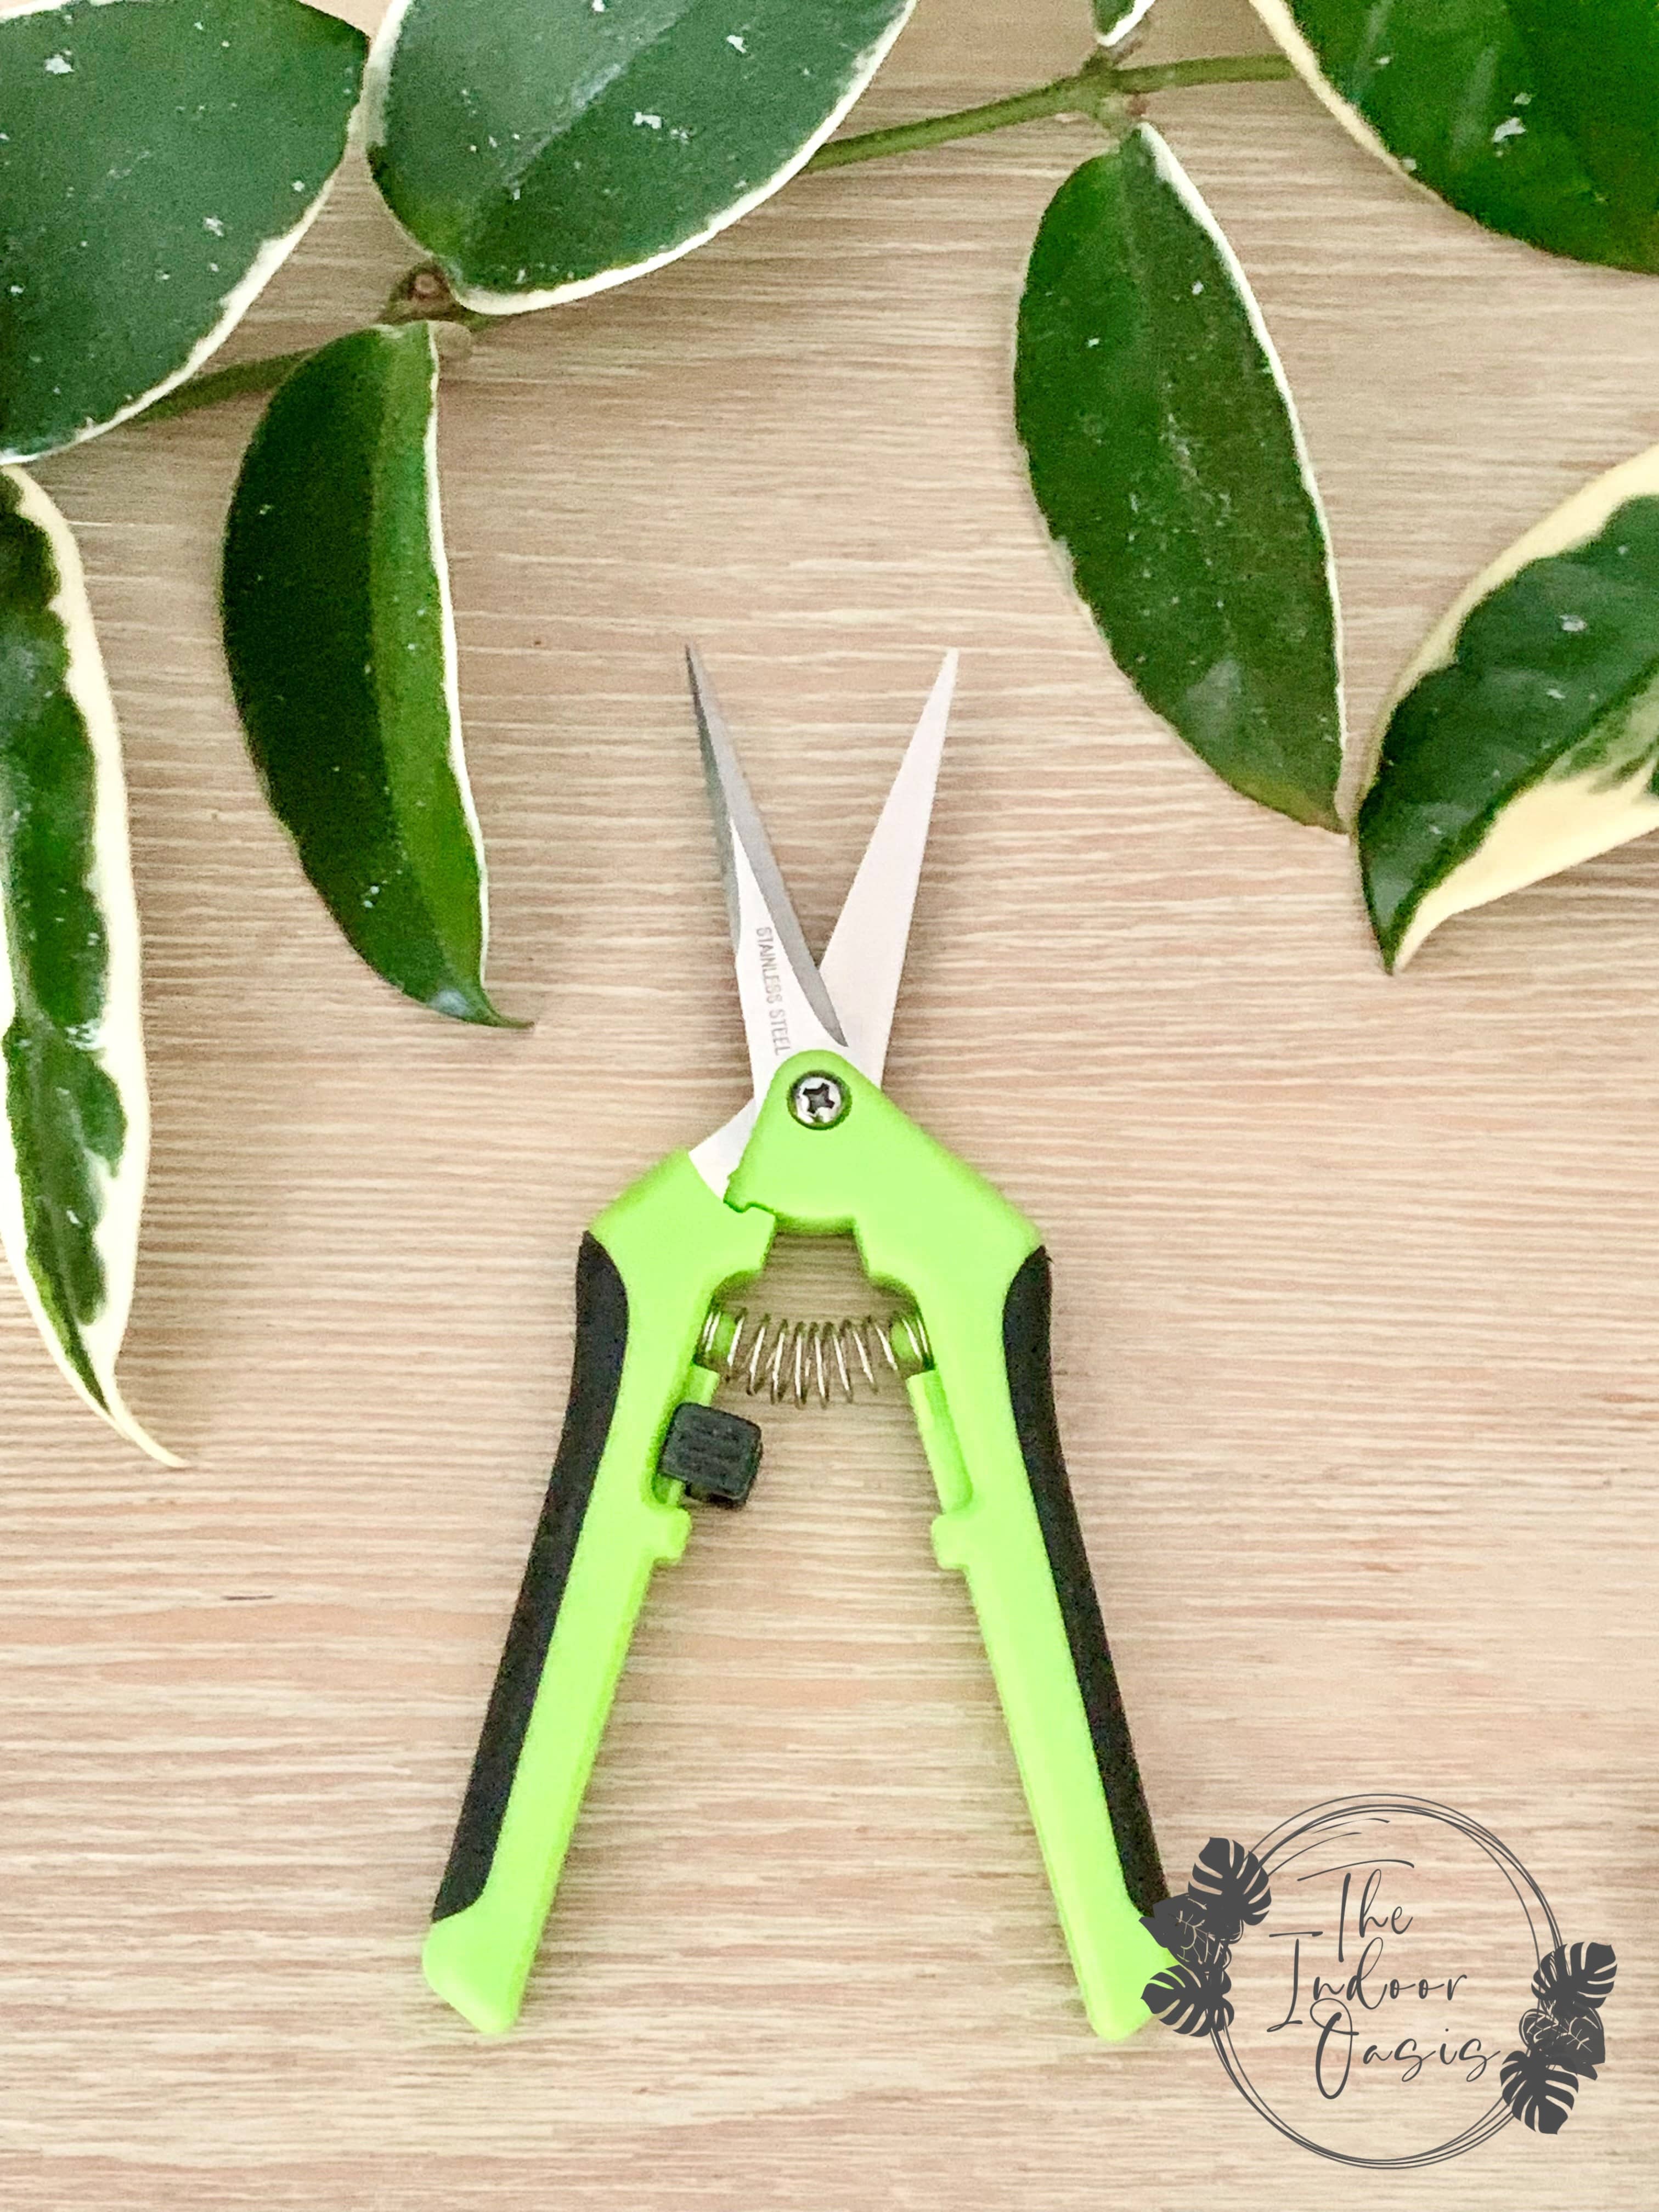 Plant Propagation Snips Shears Open detail The Indoor Oasis NZ